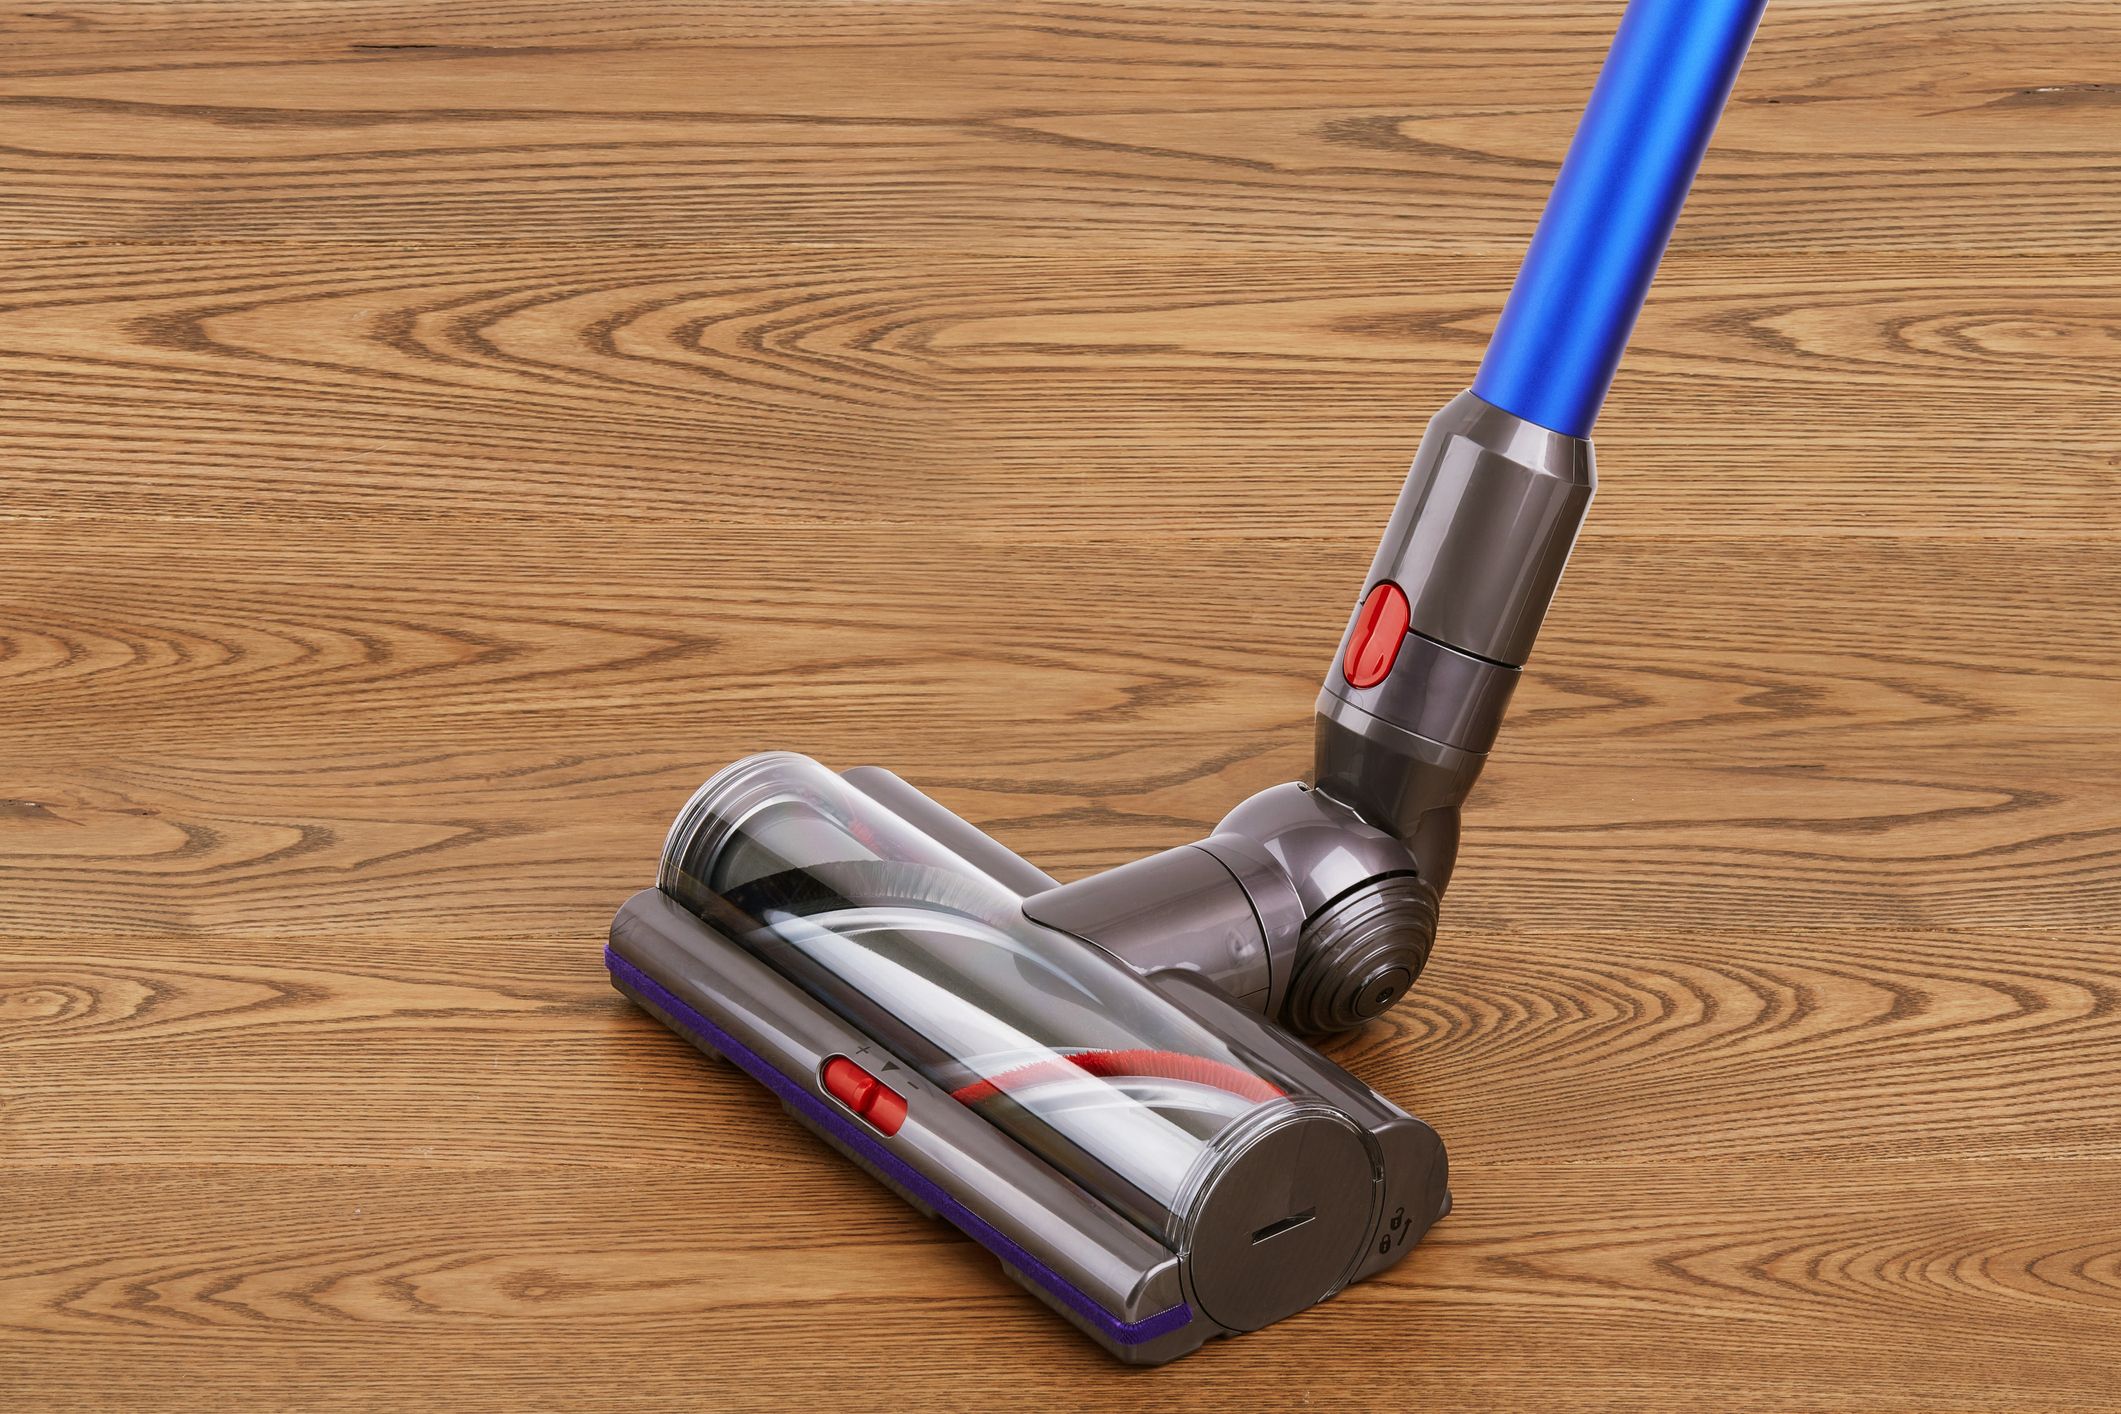 Best Vacuum Cleaners 2021 Our Expert, Which Shark Vacuum Is Best For Carpet And Hardwood Floors